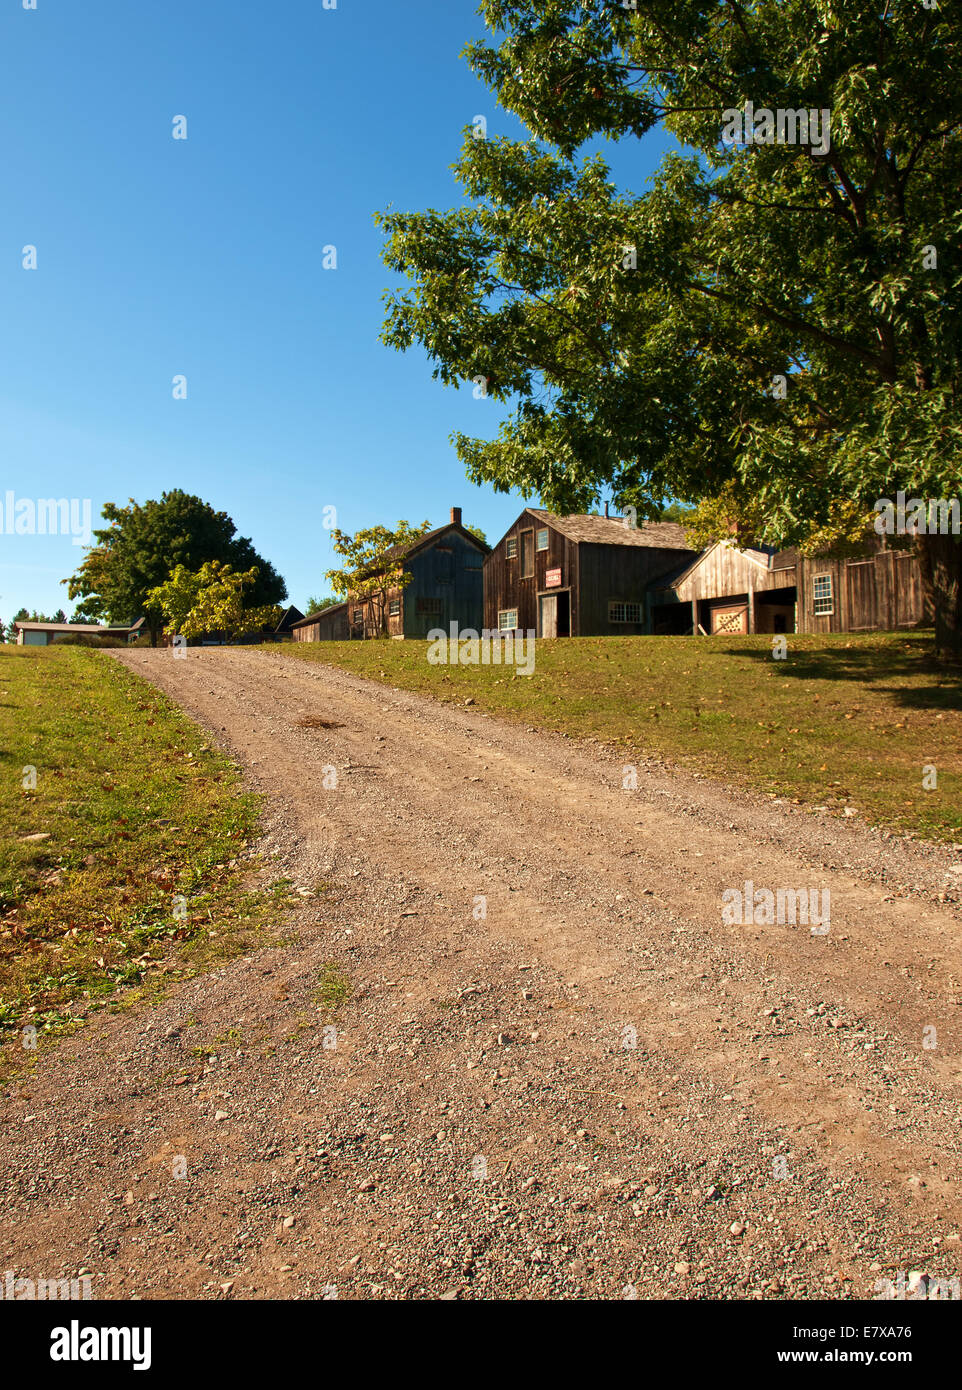 dirt road to a small rural town Stock Photo